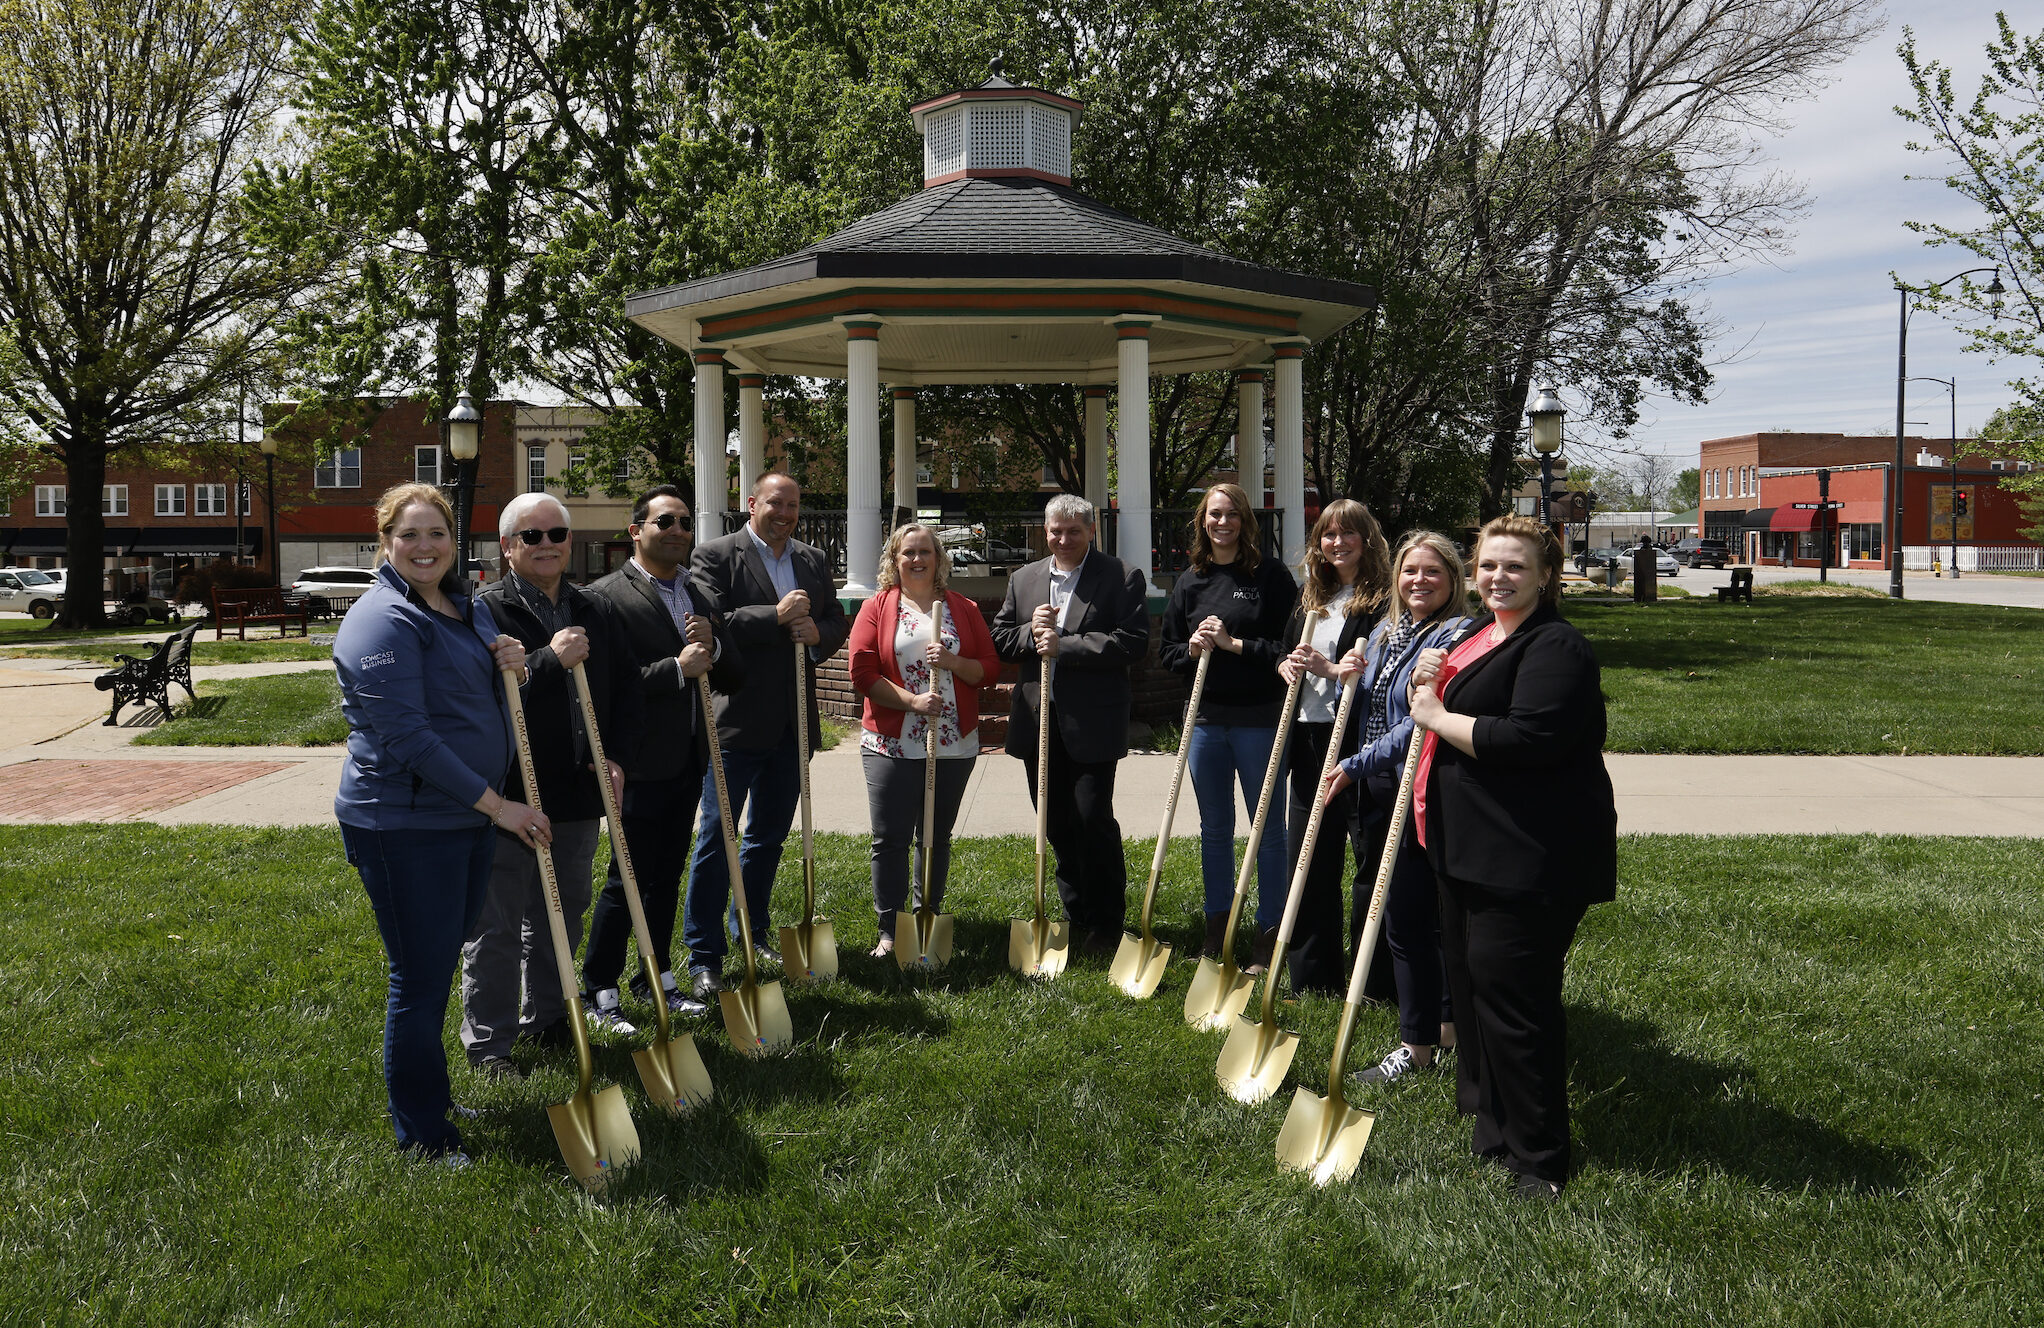 Comcast Expands Into Paola and Hillsdale with a Groundbreaking Ceremony